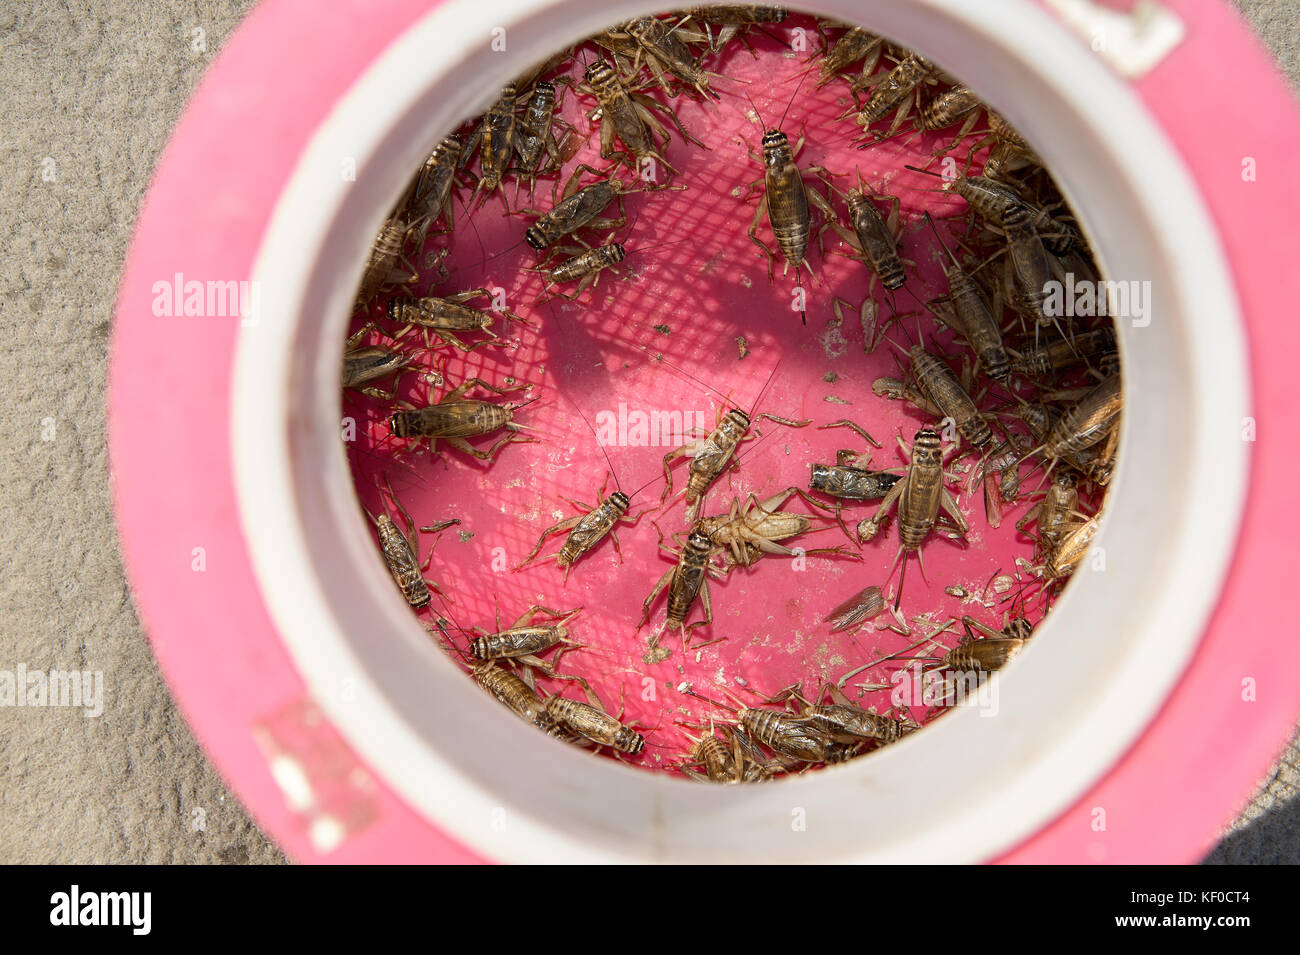 https://c8.alamy.com/comp/KF0CT4/live-crickets-in-a-cricket-cage-to-be-used-as-bait-for-freshwater-KF0CT4.jpg